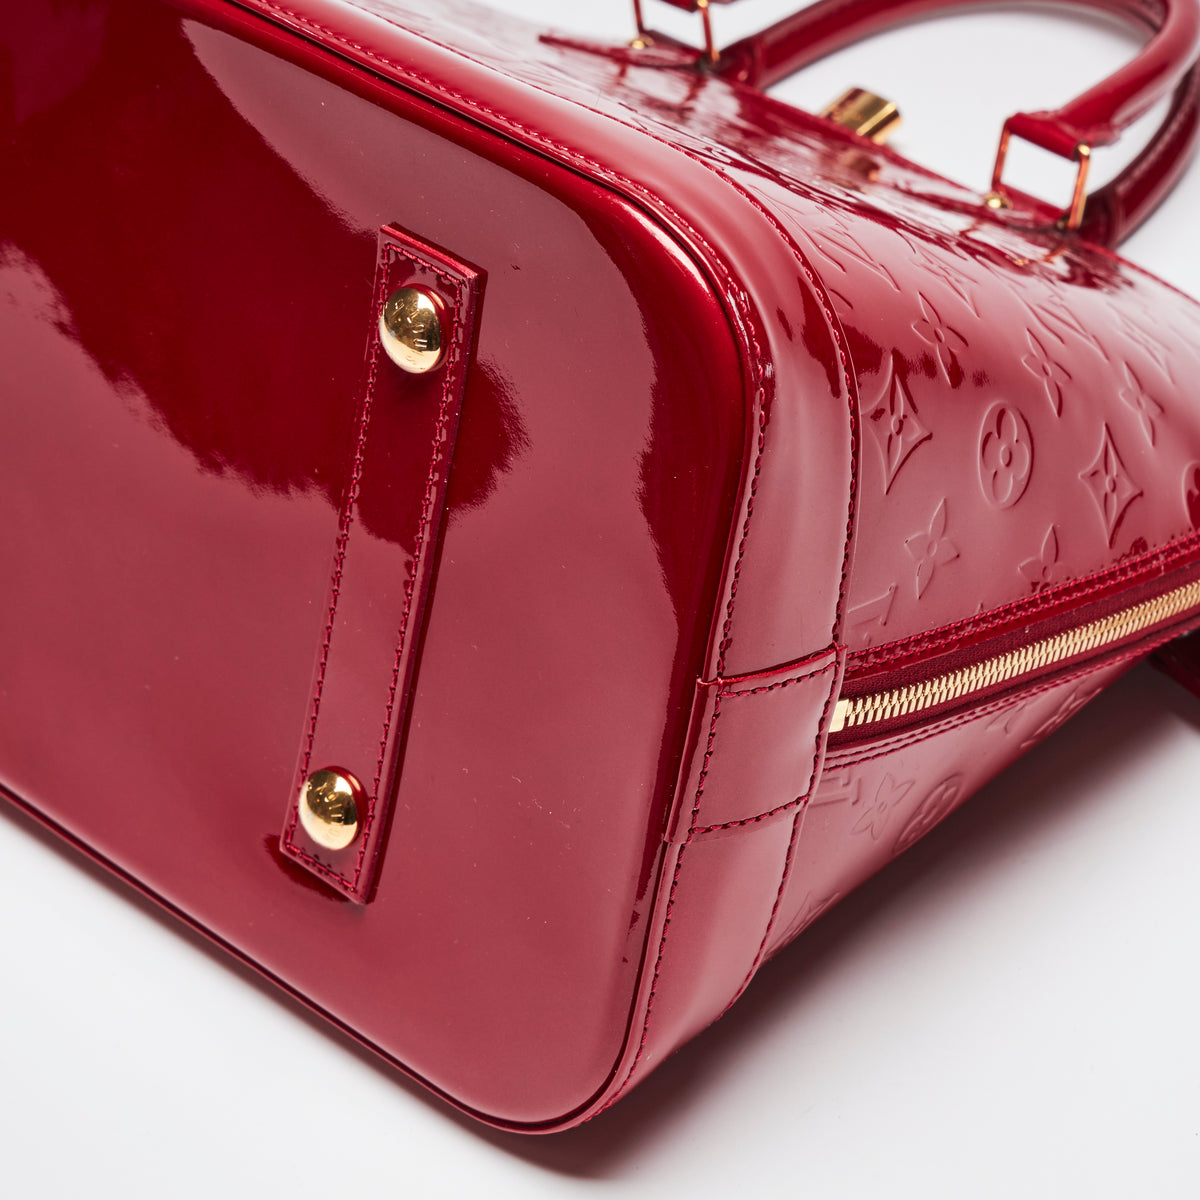 Pre-Loved Large Monogram Embossed Red Patent Leather Half Dome Shaped Top Handle Bag. (corner)